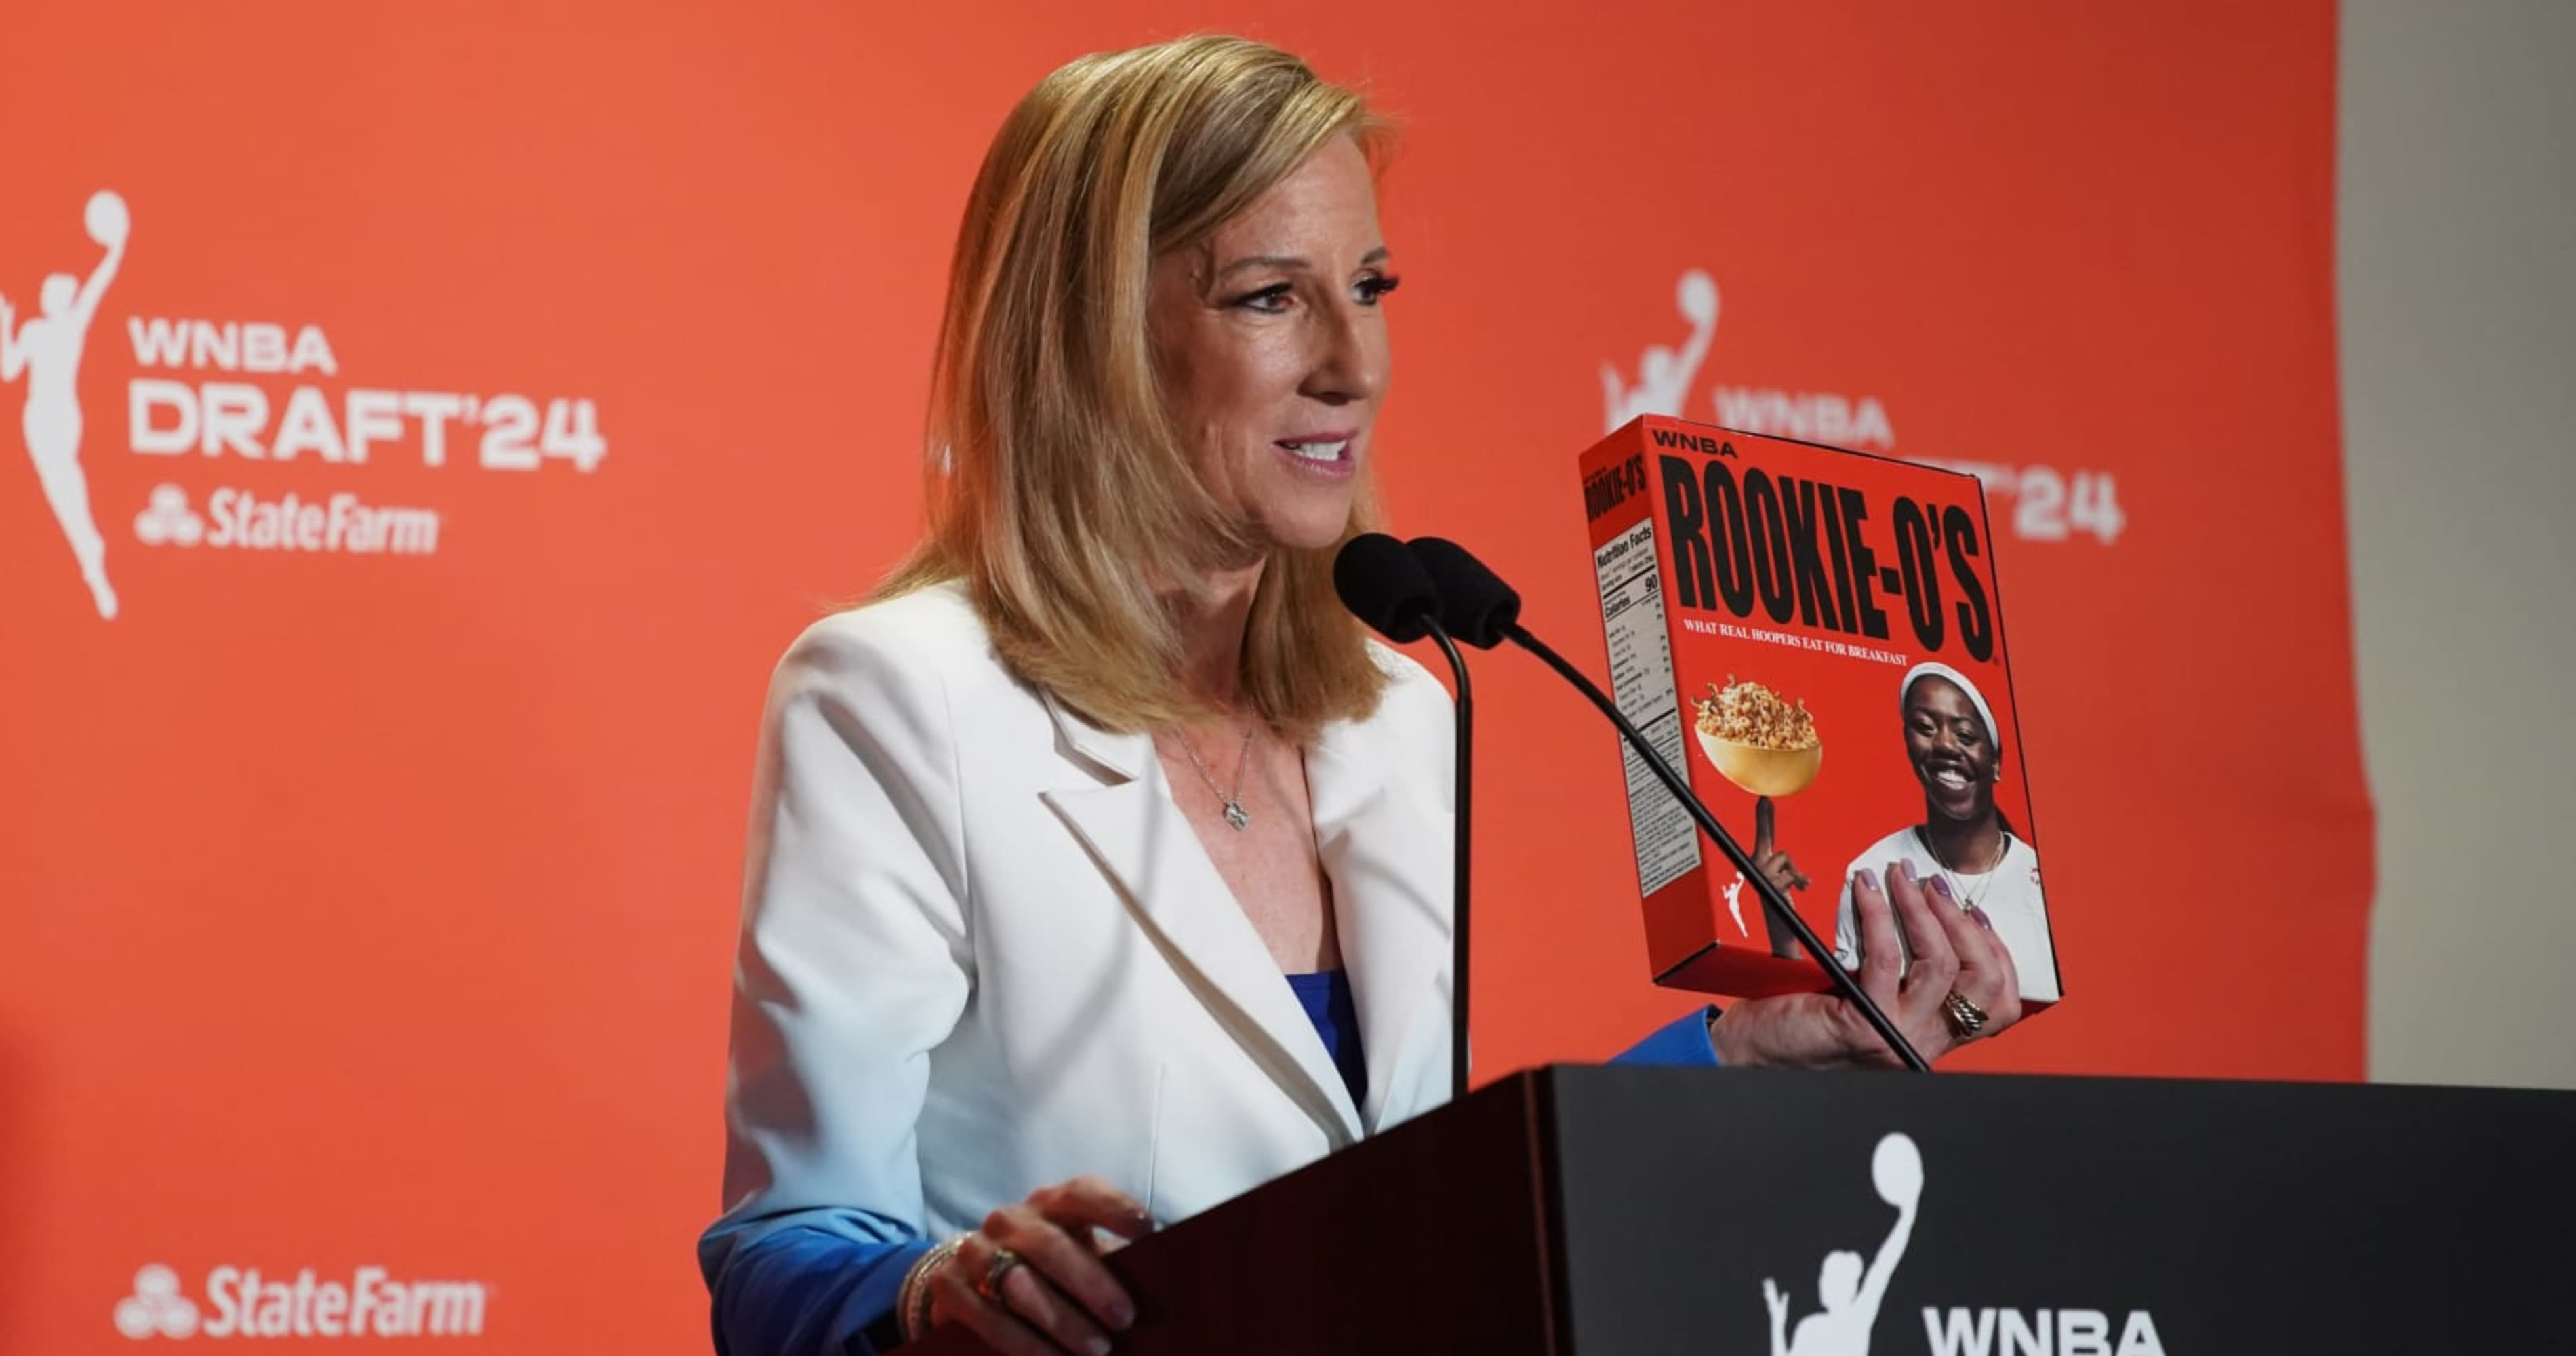 WNBA Set to Add Charter Flights for All Games, Commissioner Cathy Engelbert Says